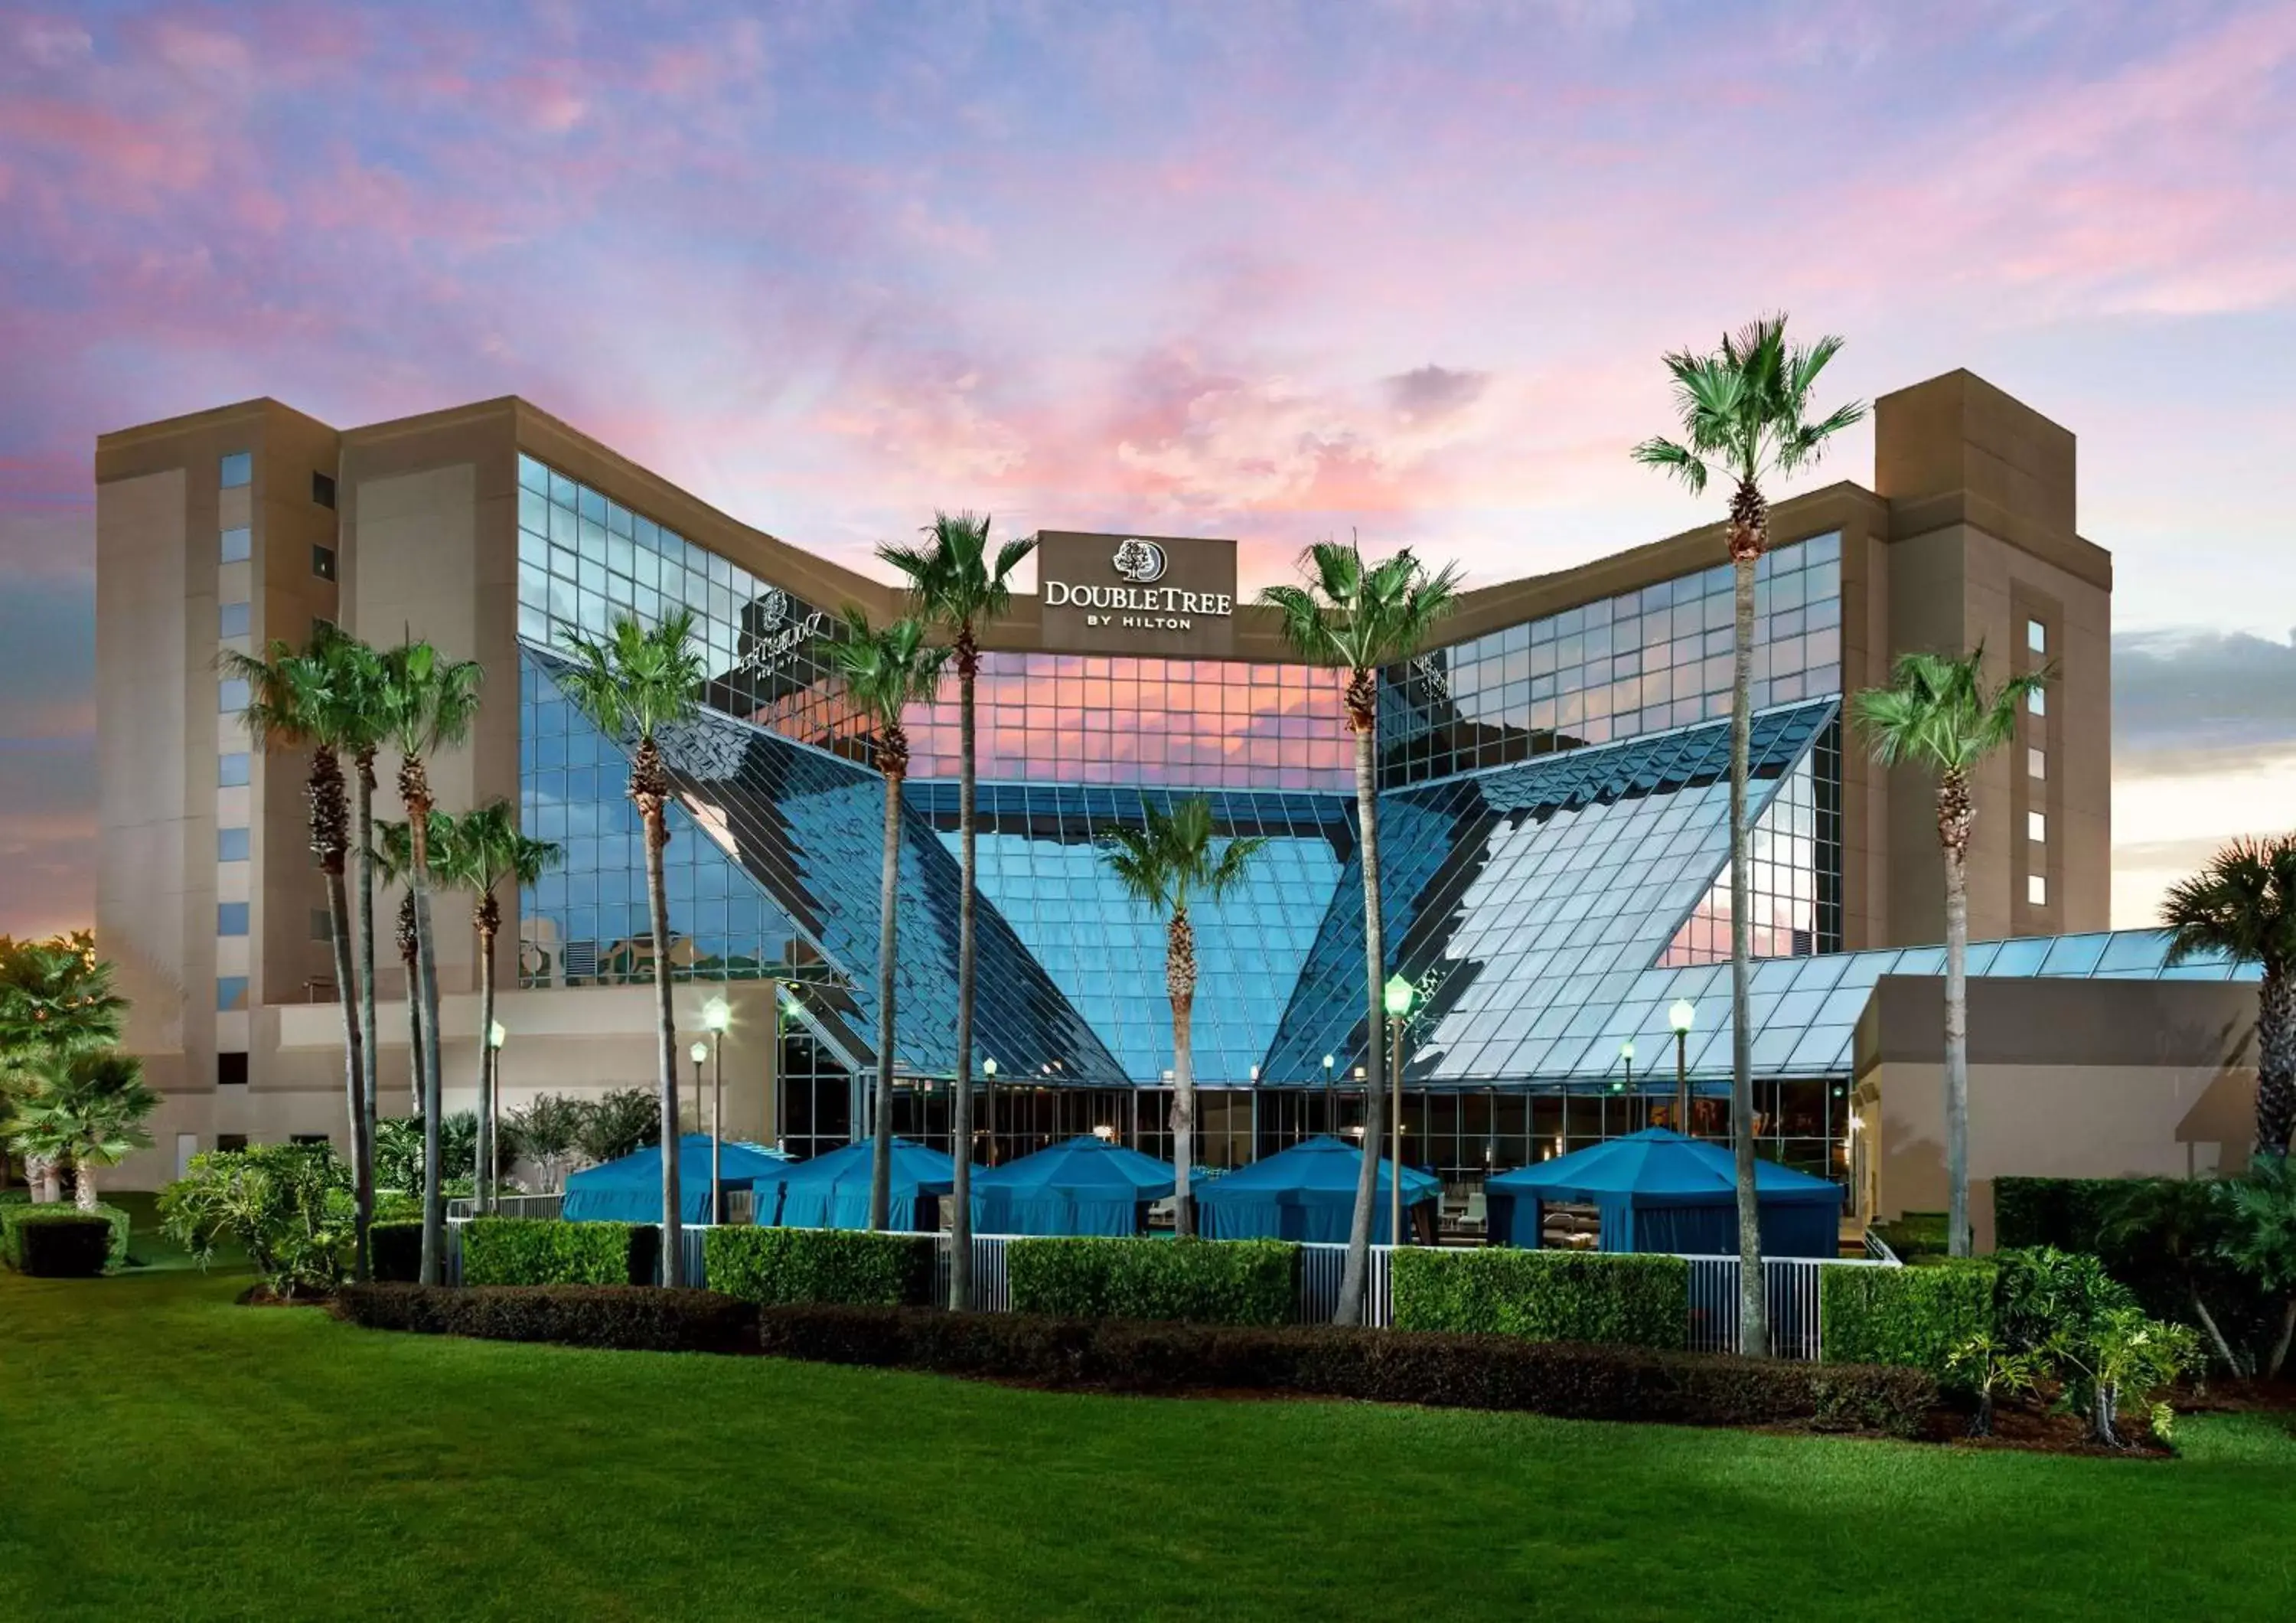 Property Building in DoubleTree by Hilton Orlando Airport Hotel